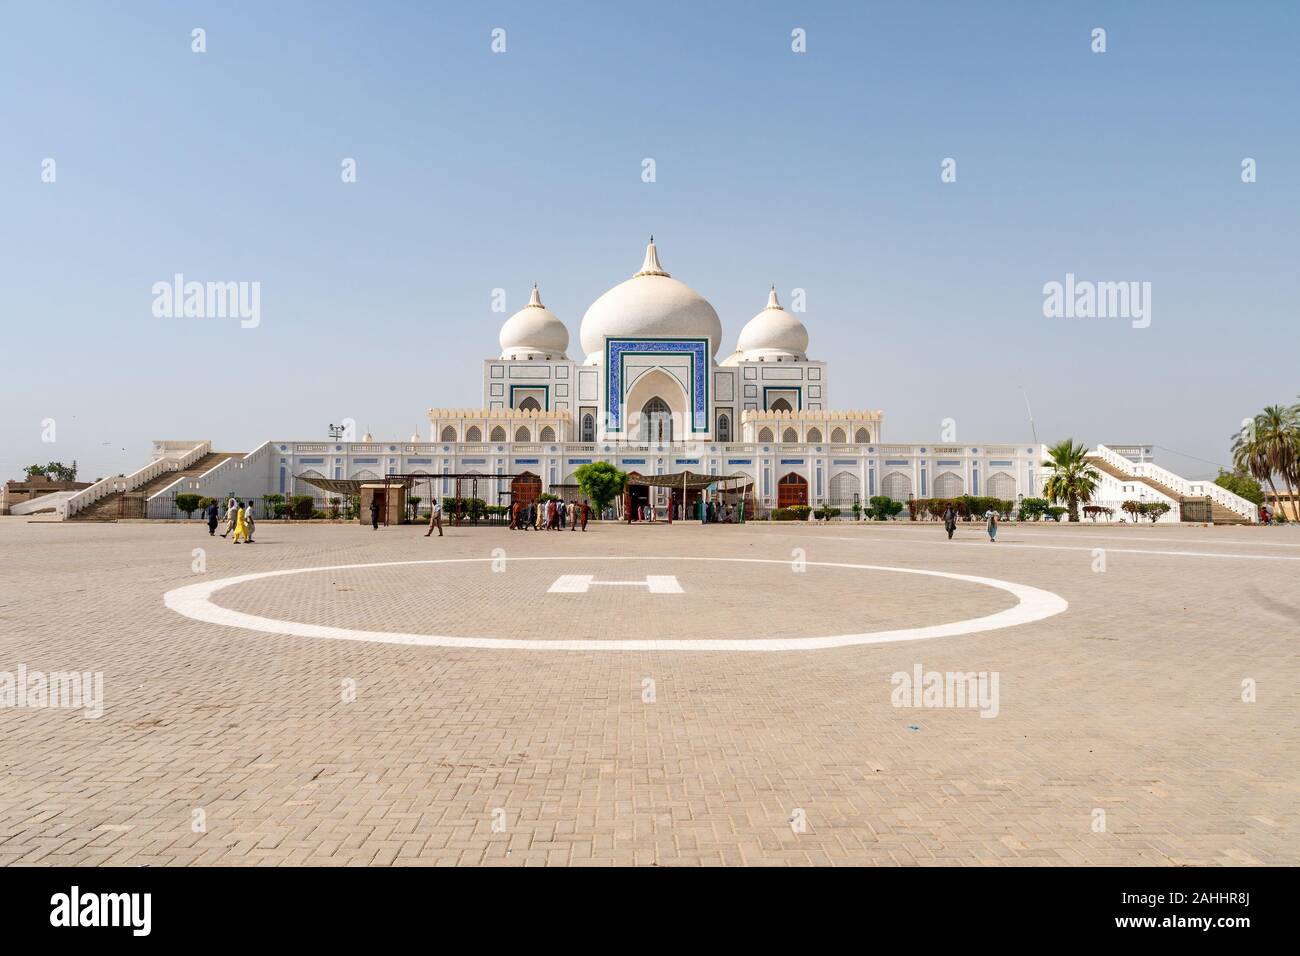 Larkana Bhutto Family Mausoleum Picturesque View with Helicopter Landing Zone Markings on a Sunny Blue Sky Day Stock Photo